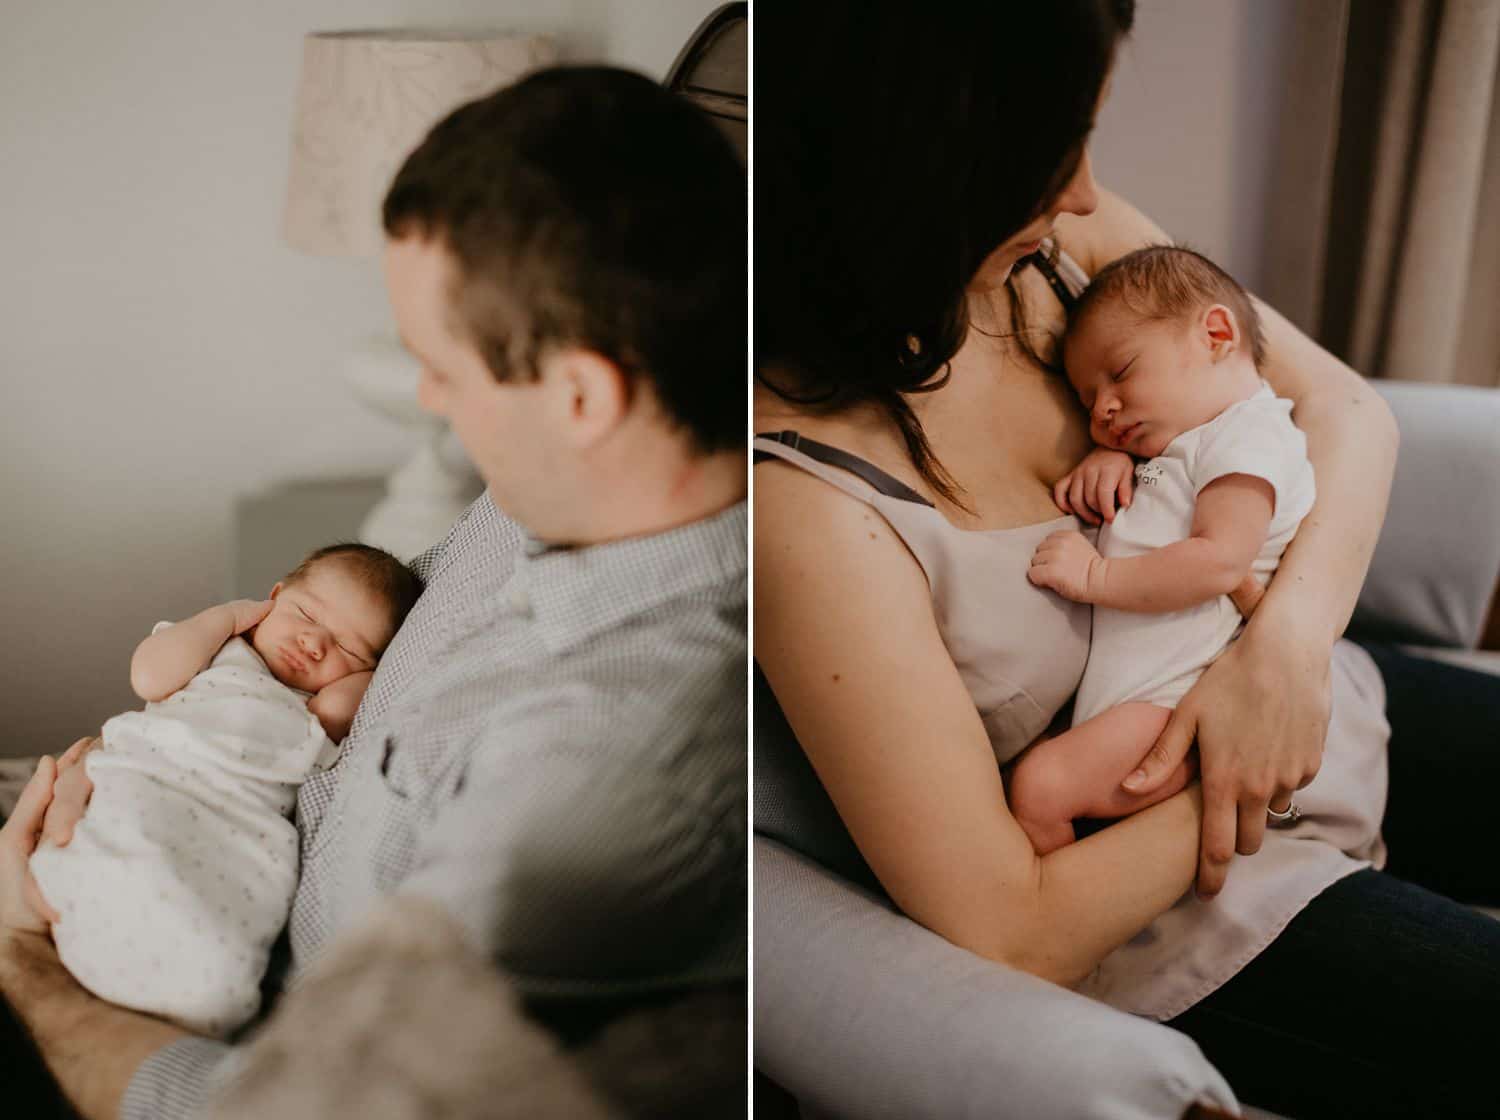 Lifestyle Newborn Photos: Left / A sleeping, swaddled baby is photographed in-focus while Dad, who's holding his child, fades into bokeh. Right / Only the side of Mom's face is visible as she looks down at her sleeping newborn in a onesie.